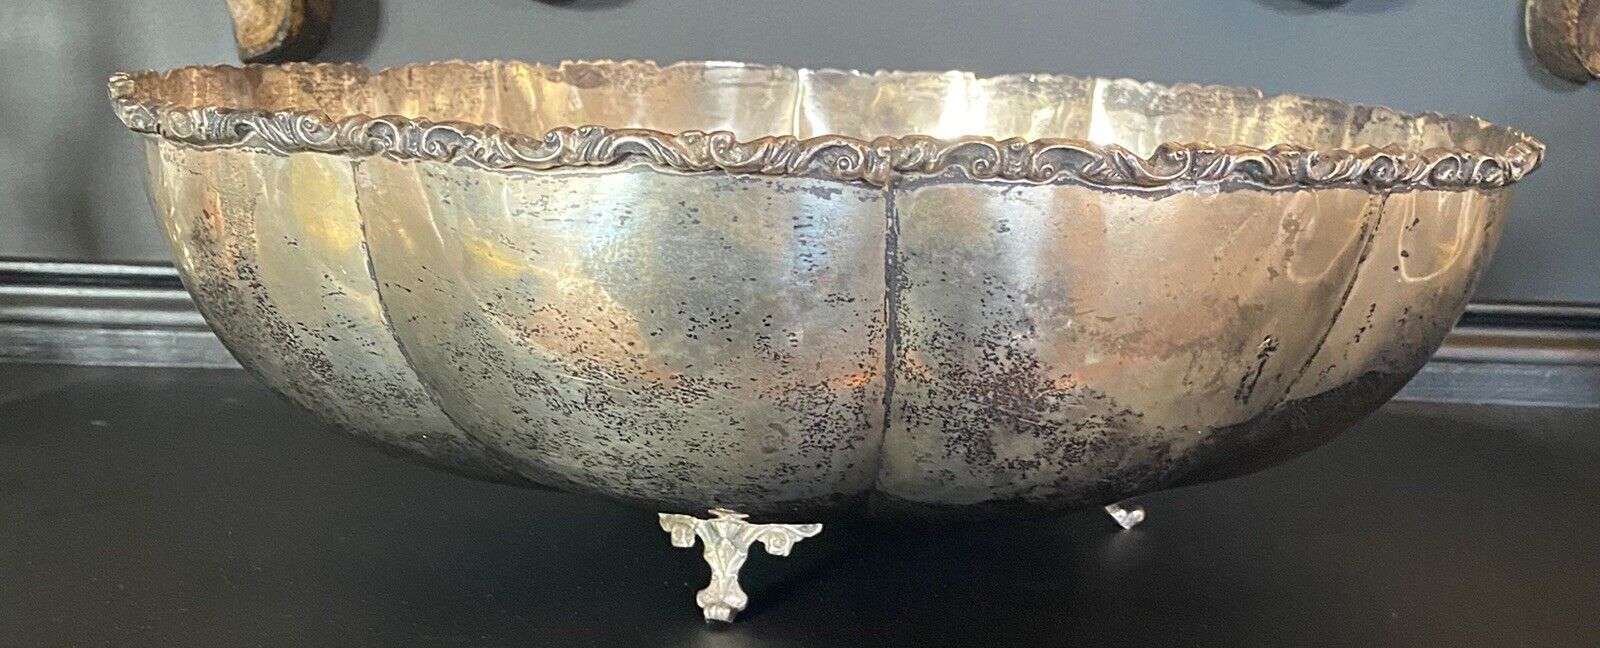 Mexico Df 925 Sterling Silver 16.5" Footed Bowl 1,814.37 Grams Signed 4 Pounds!!